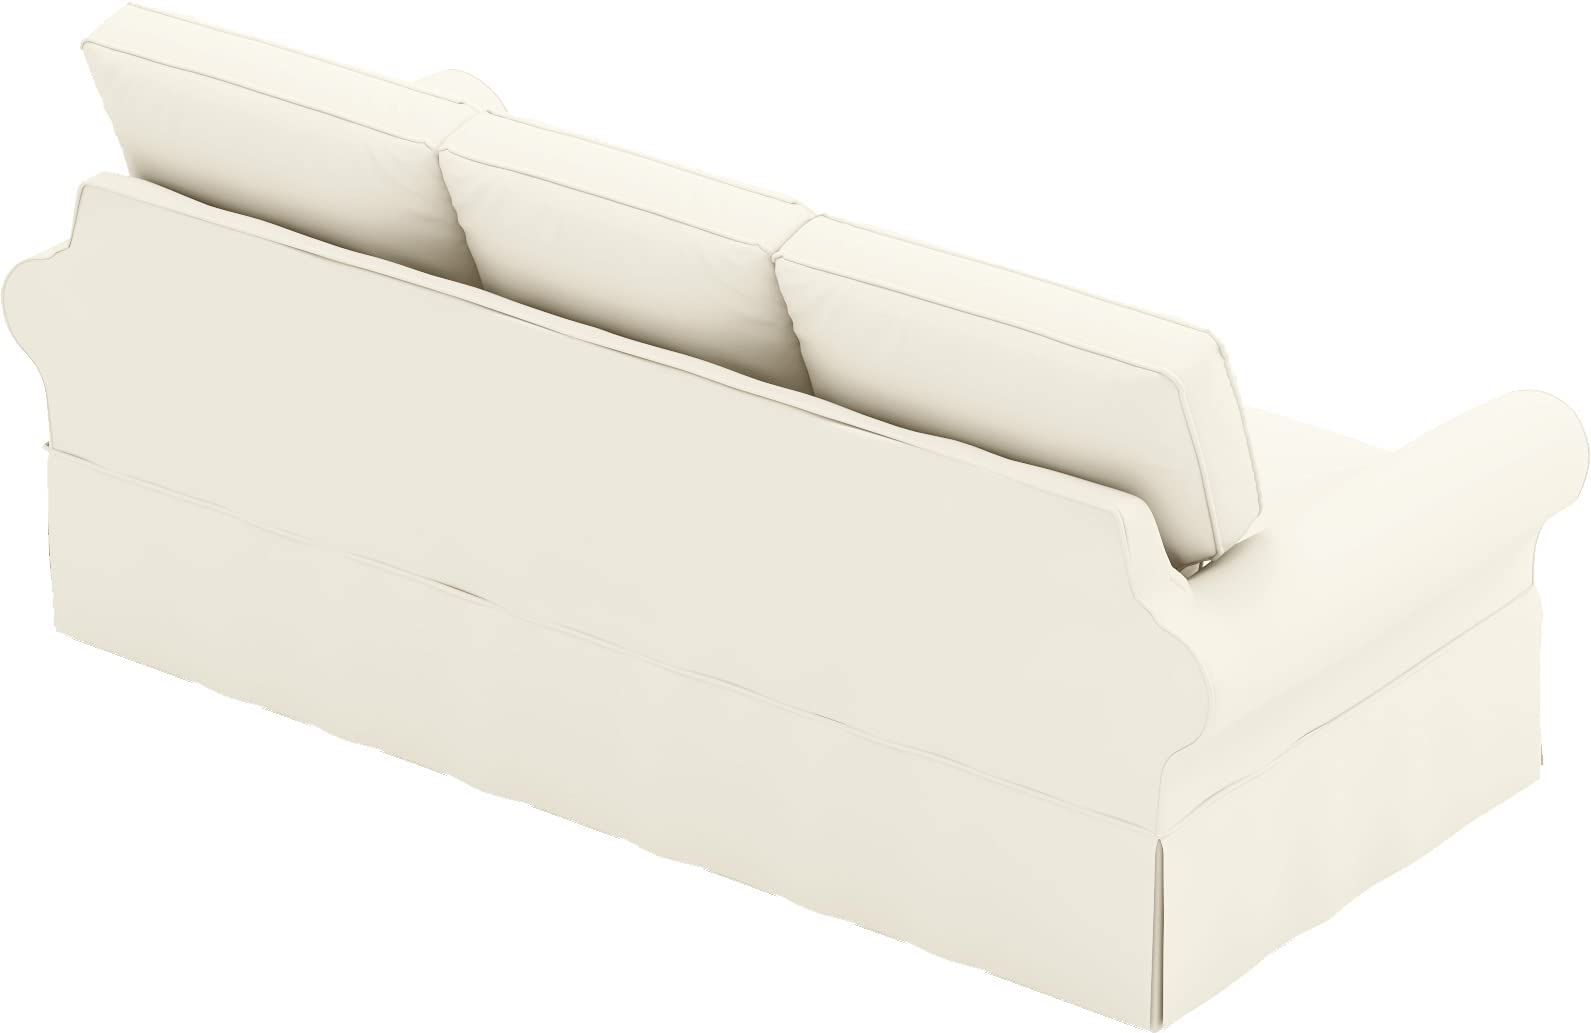 The Sofa Cover is 3 Seat Sofa Slipcover Replacement. It Fits Pottery Barn PB Basic Three Seat Sofa (Cotton Yellow)